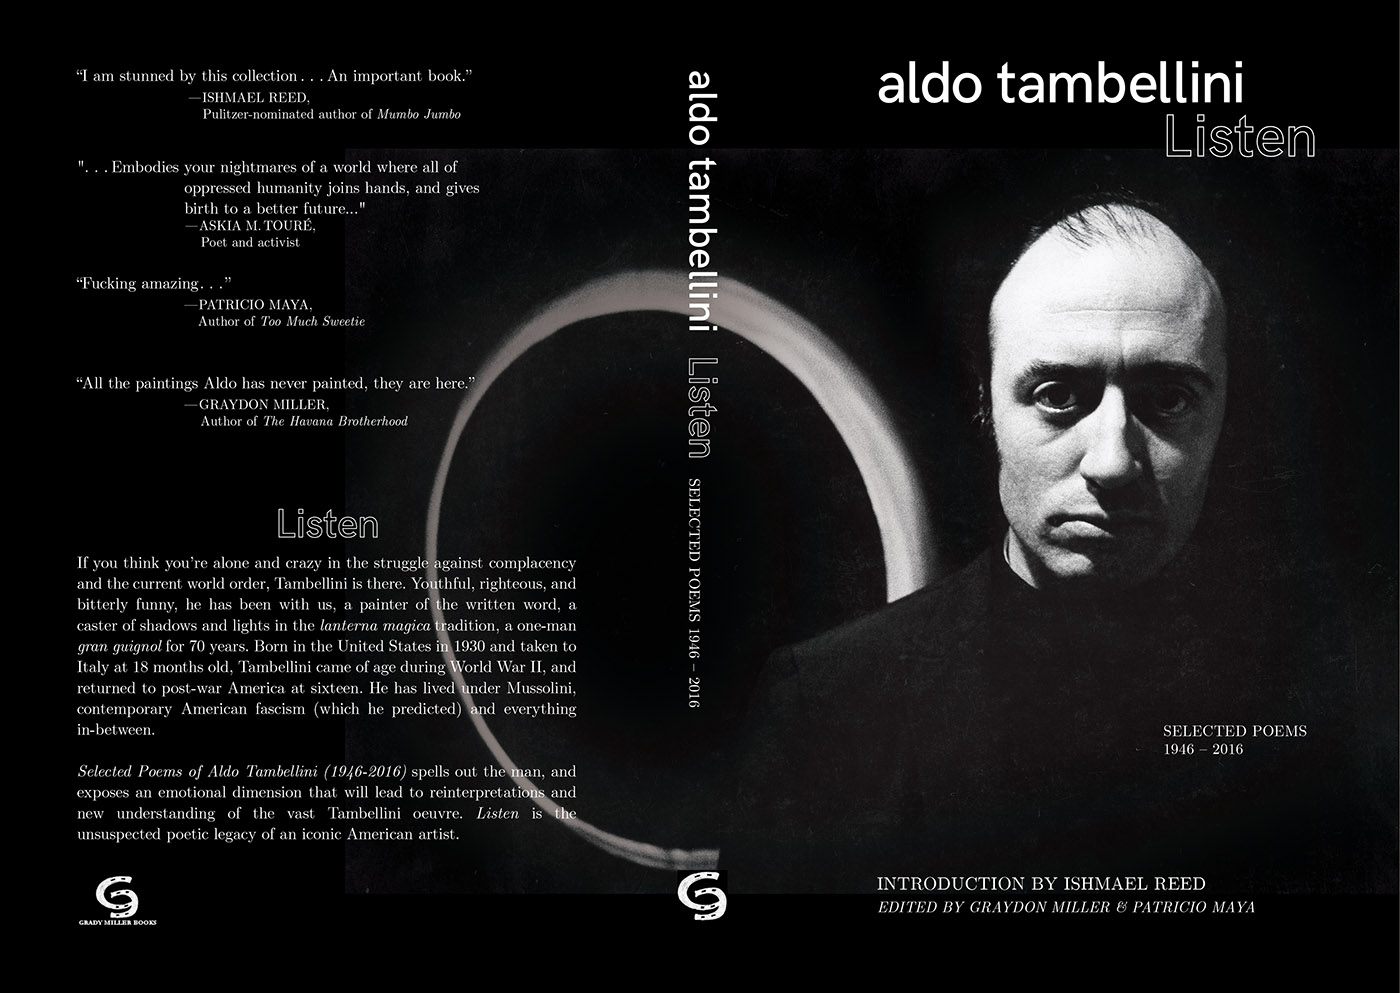 The front and back covers of AldoTambellini book, “Listen”.